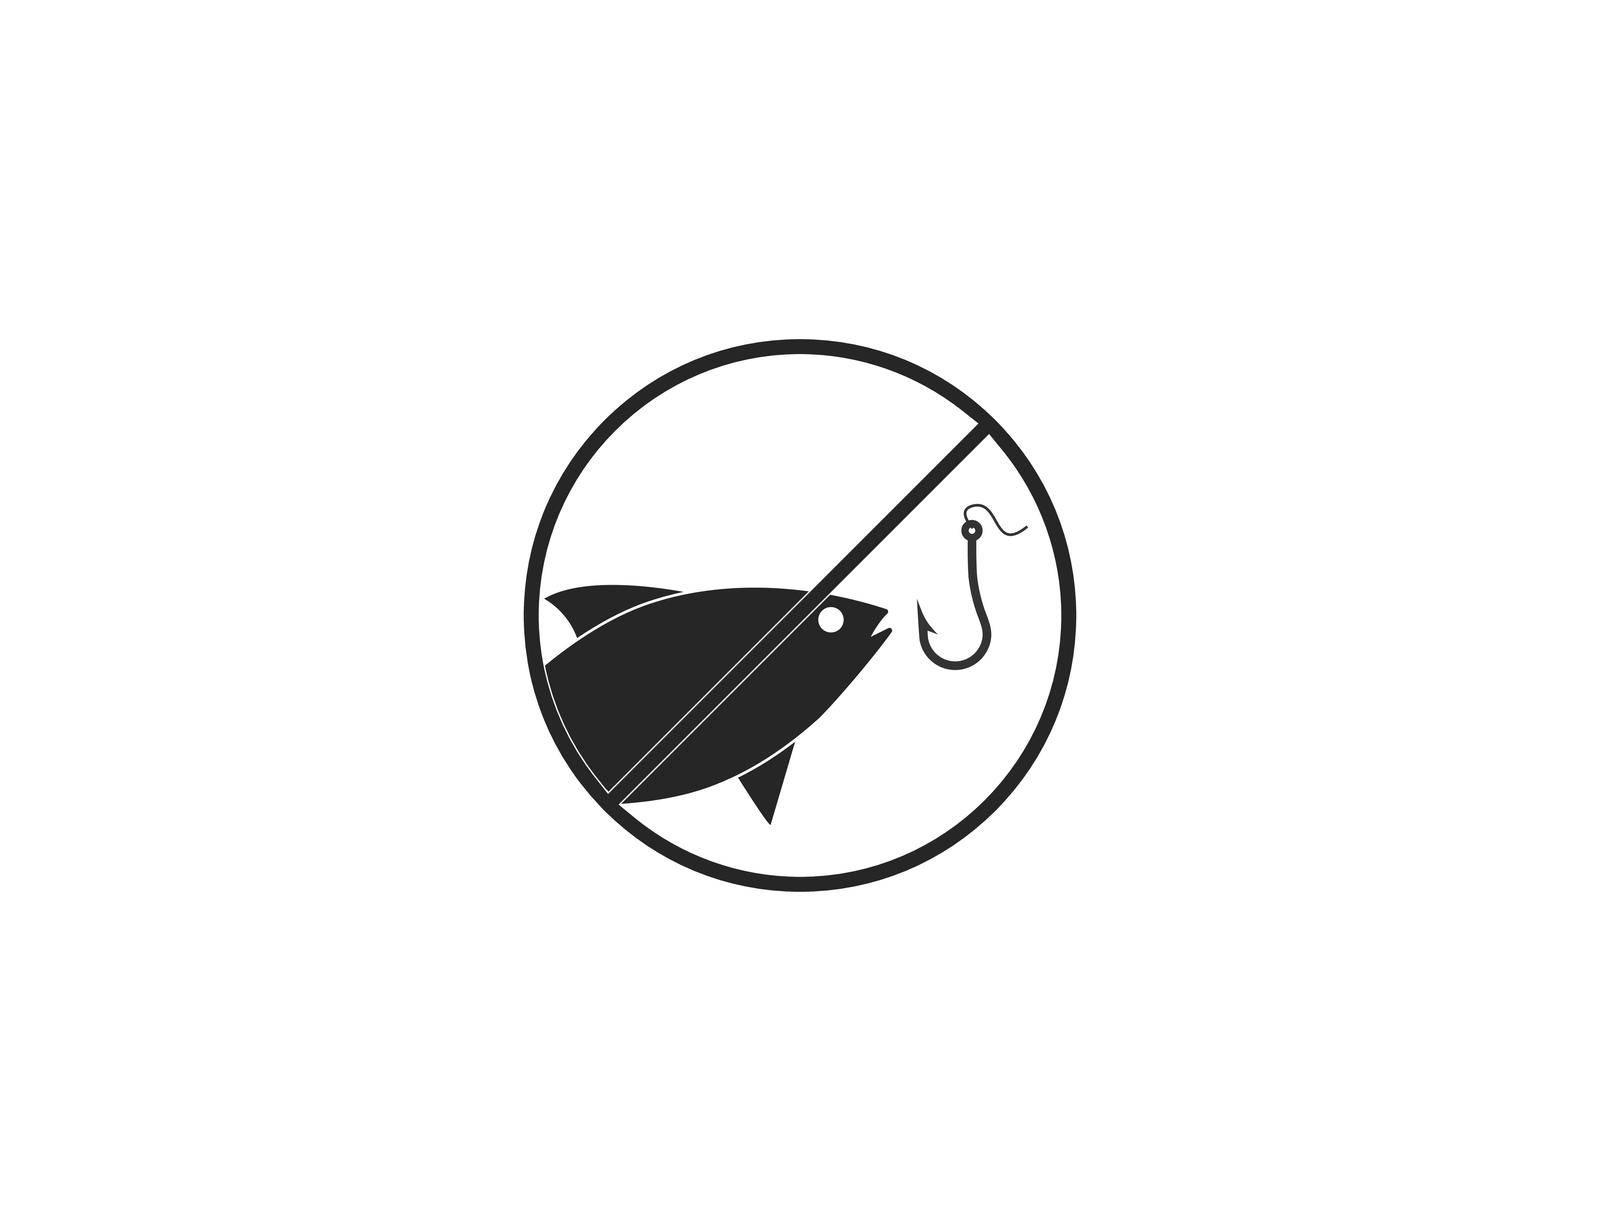 Ban, no fishing, prohibited icon. Vector illustration. Flat design. by Vertyb